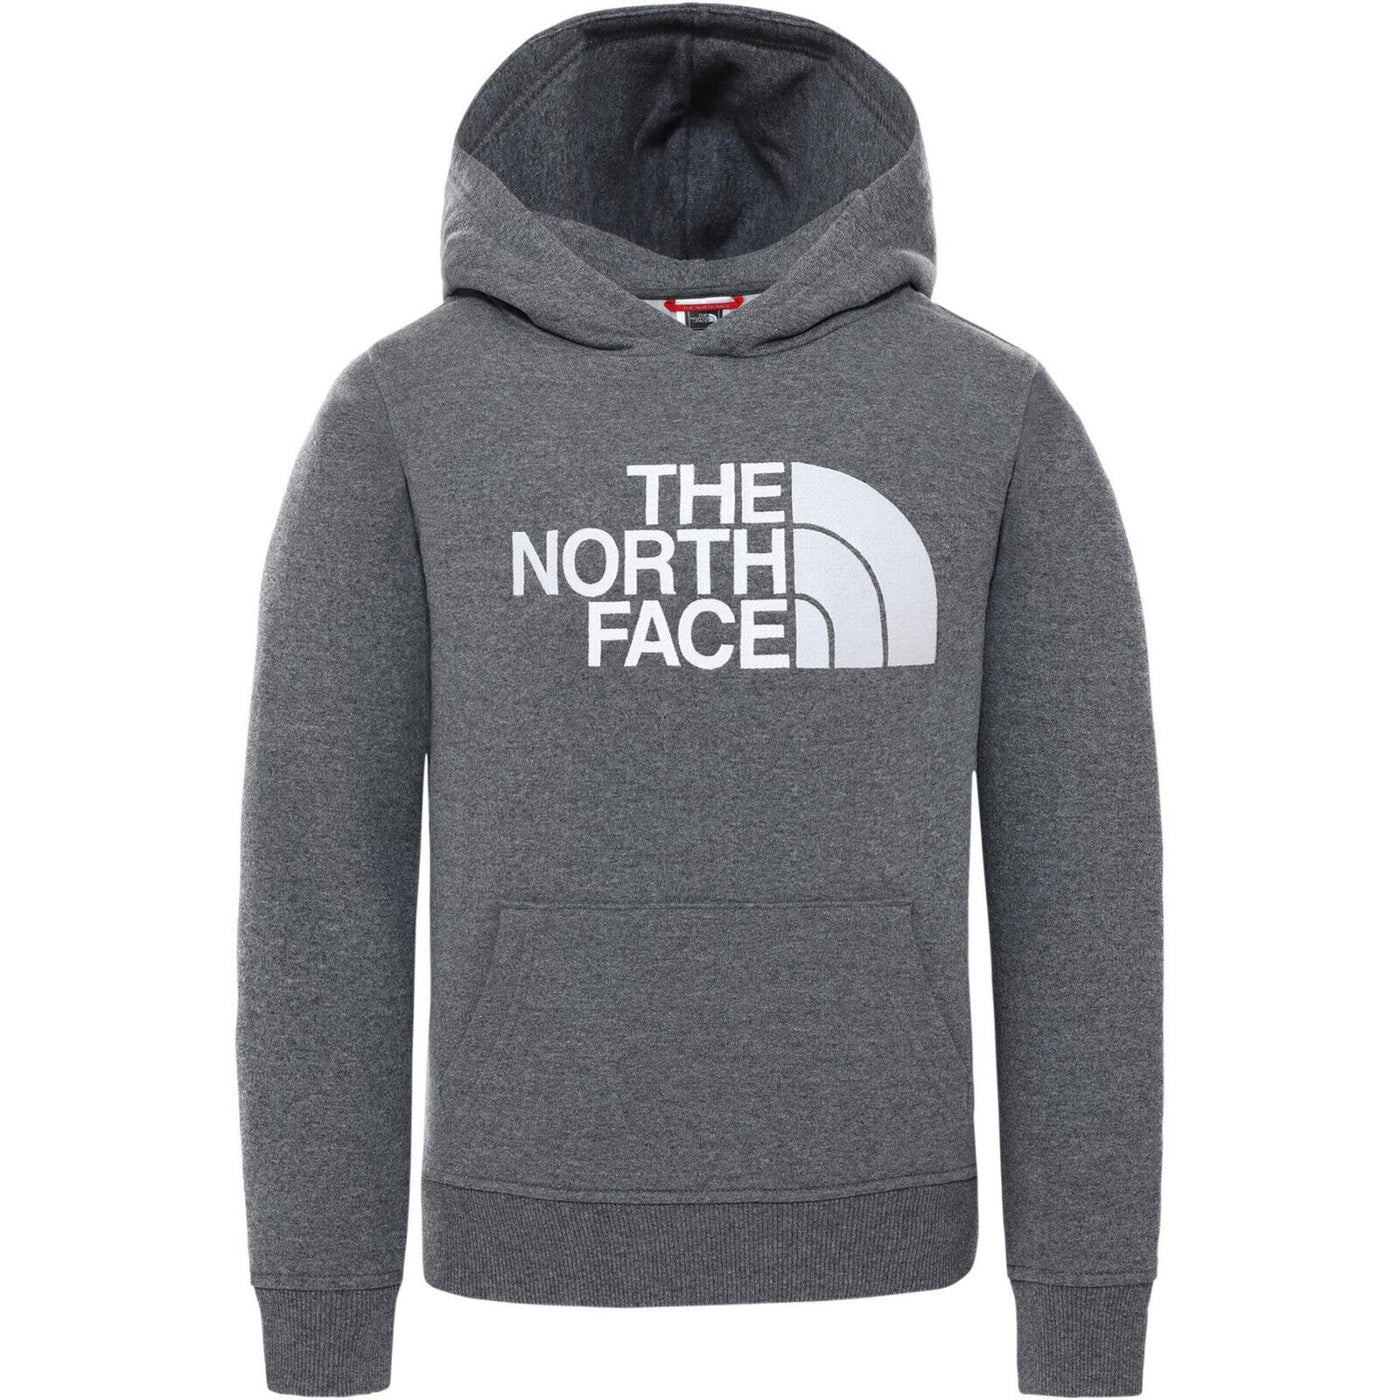 The North Face Youth Drew Peak Pullover Grey Hoodie Size XS **** SW20